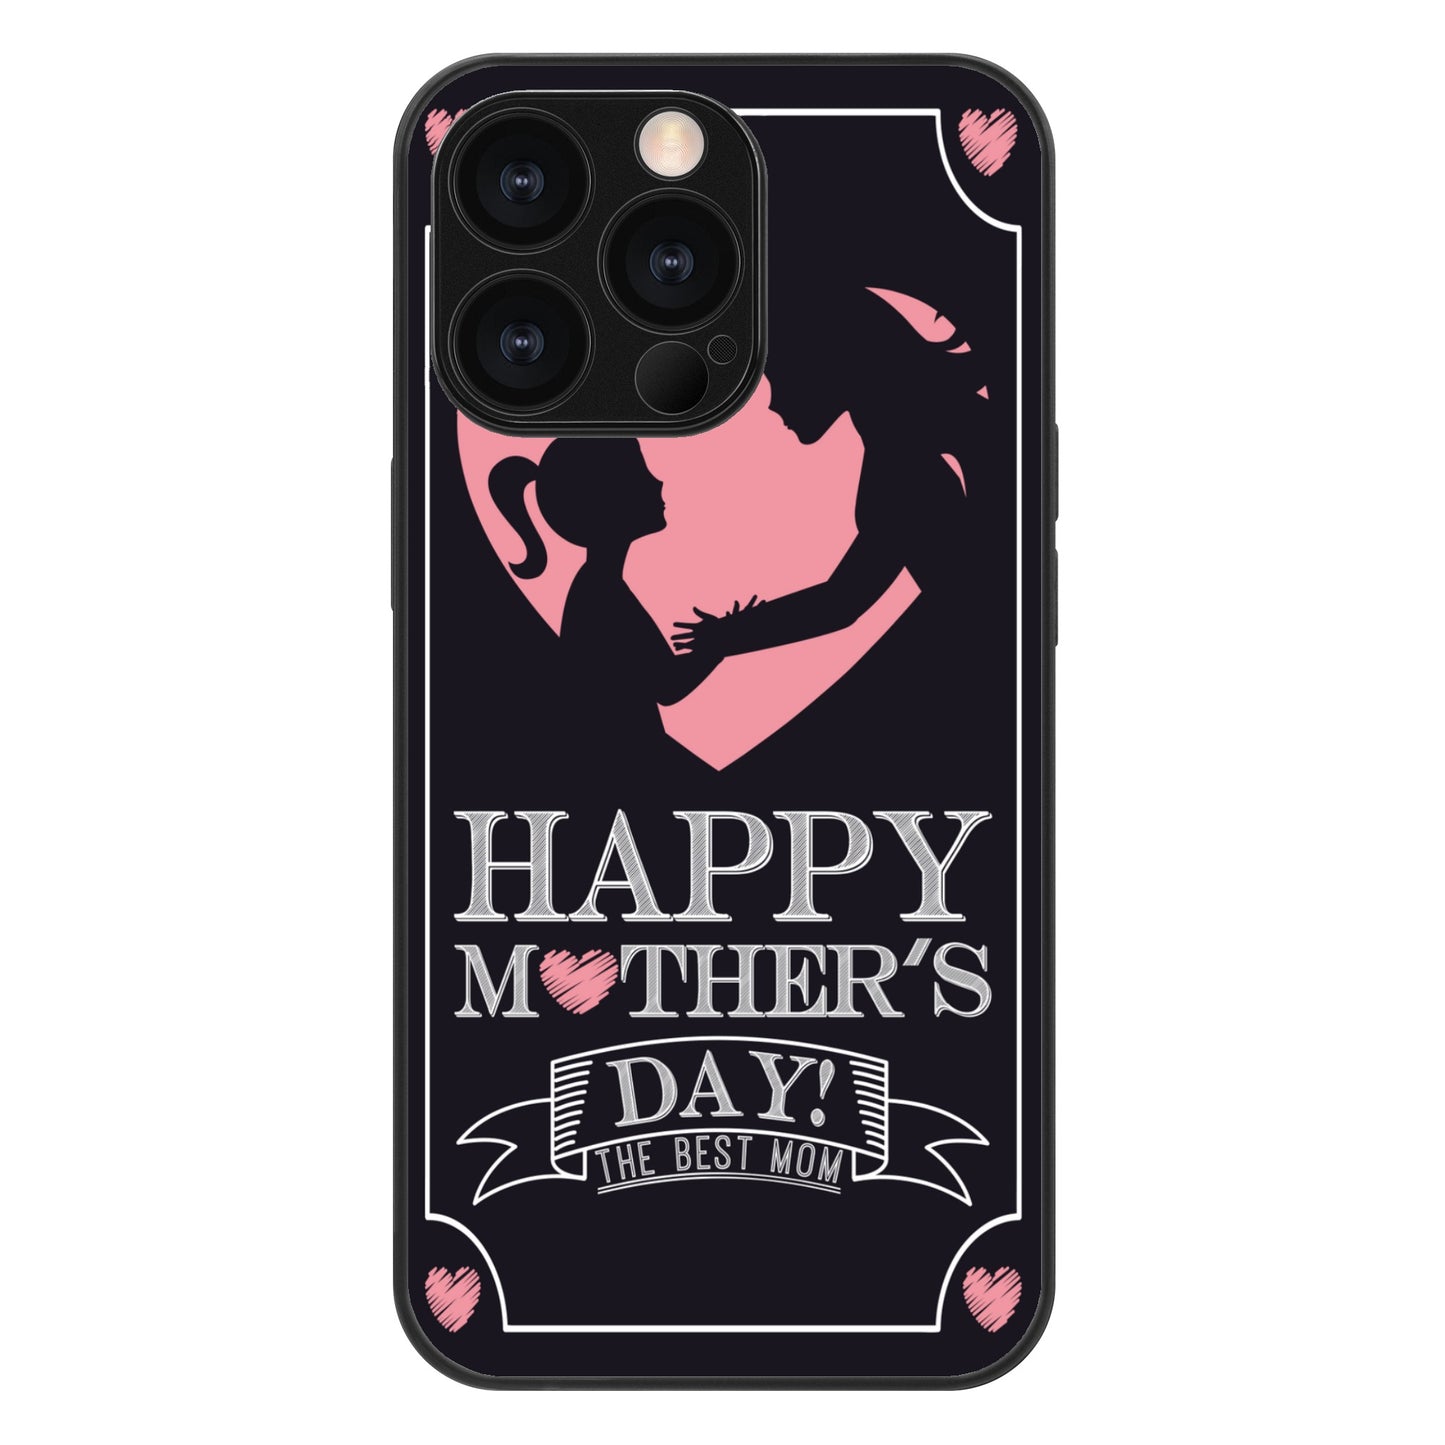 iPhone13 Series Phone Cases Great for Mothers Day Gift For the Best Mom on the Earth